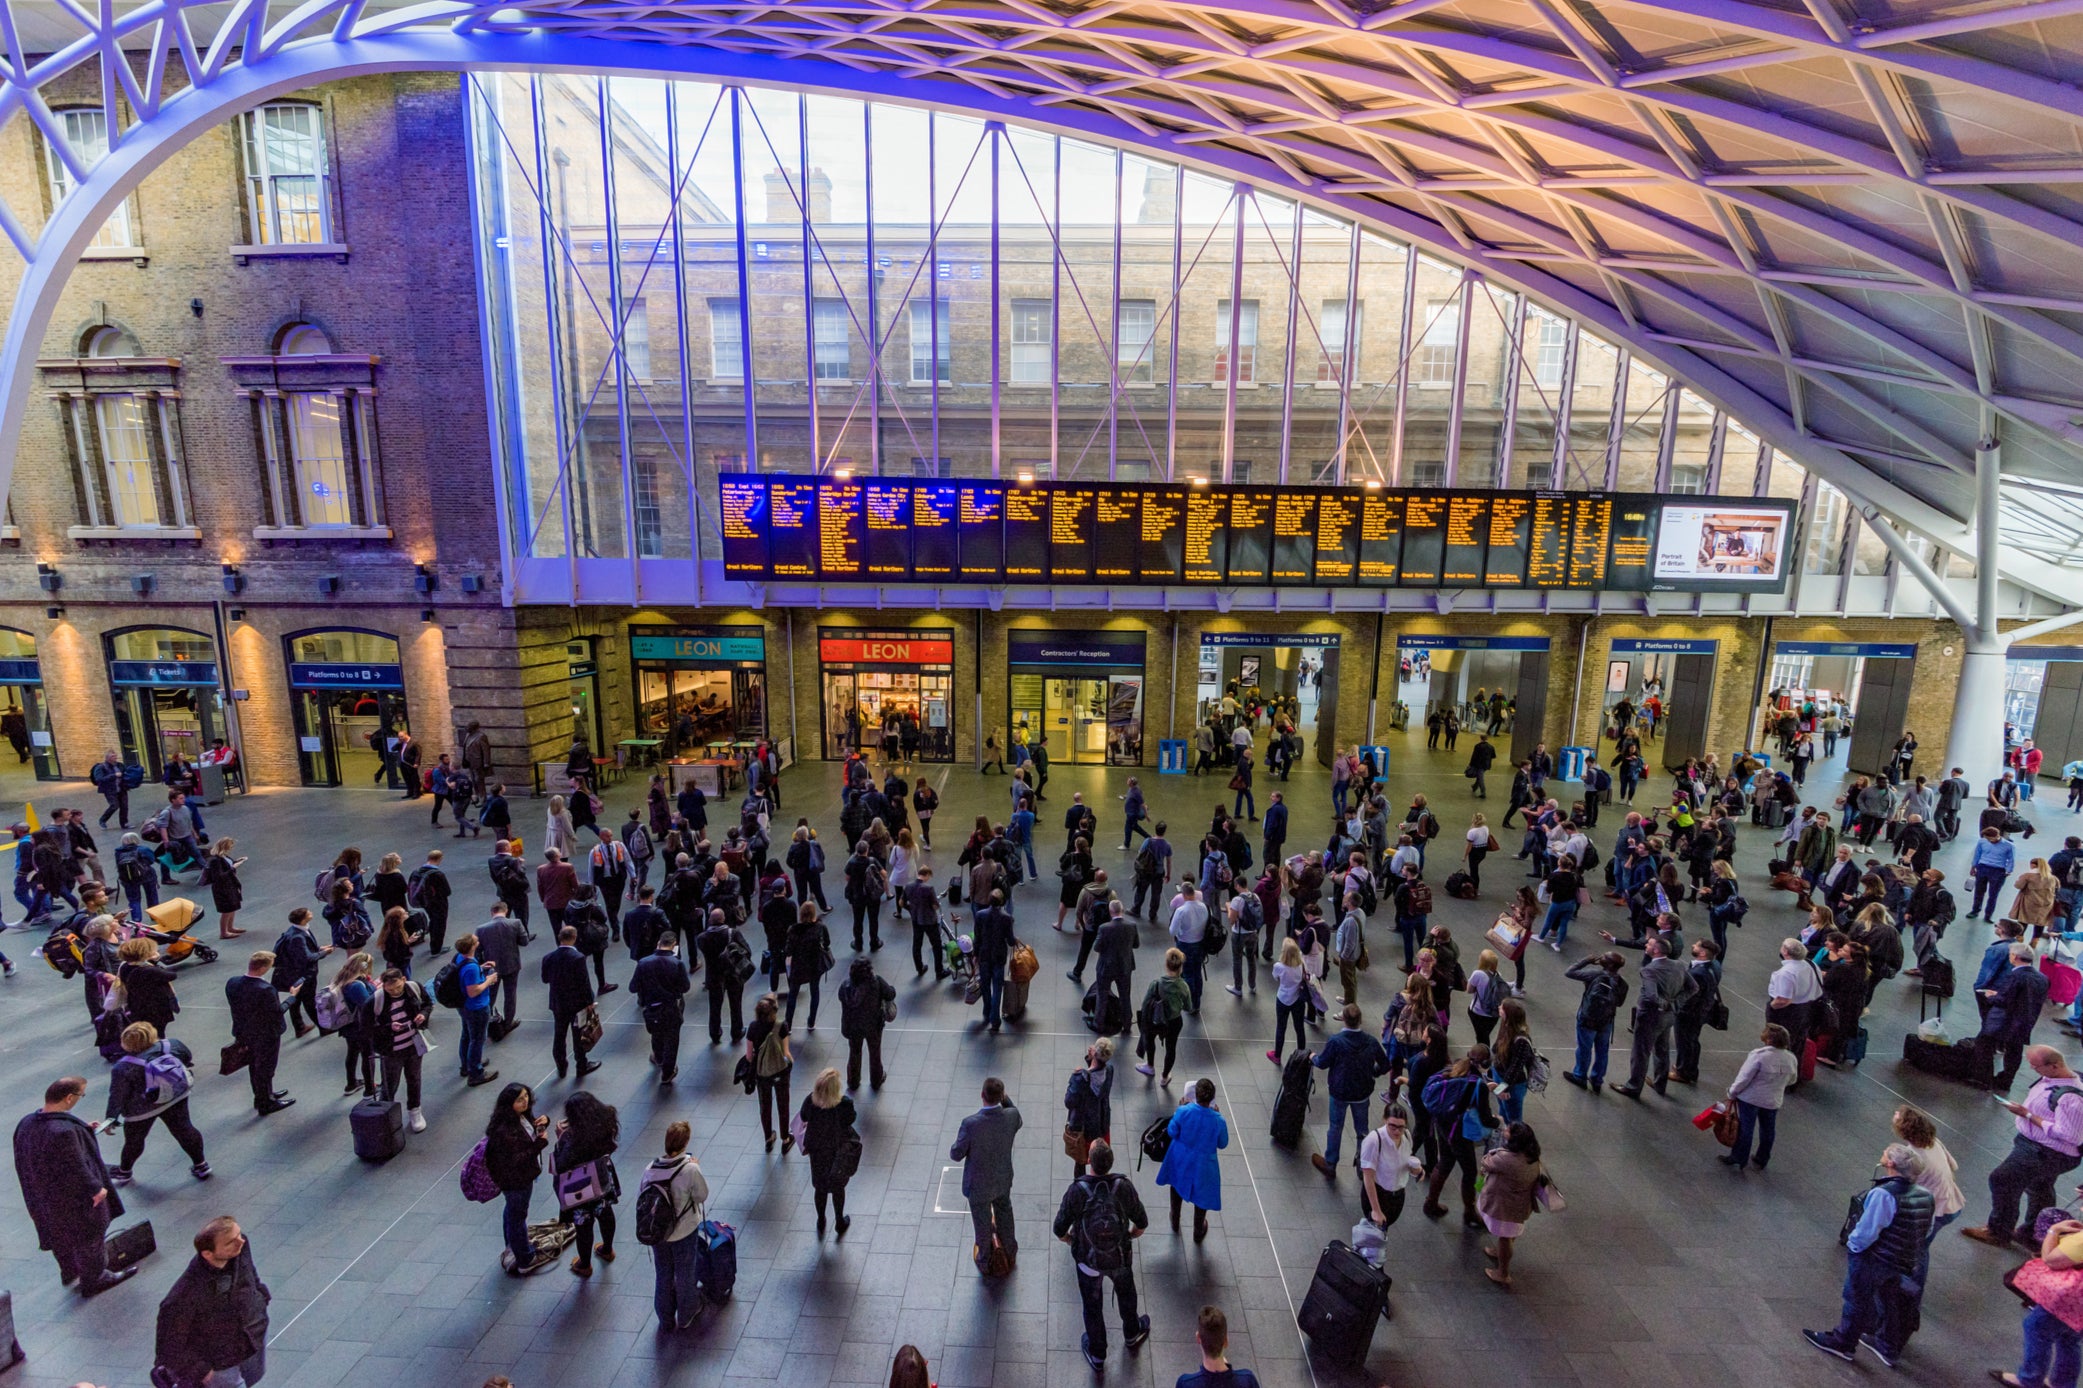 King’s Cross is one of the UK’s busiest railway stations